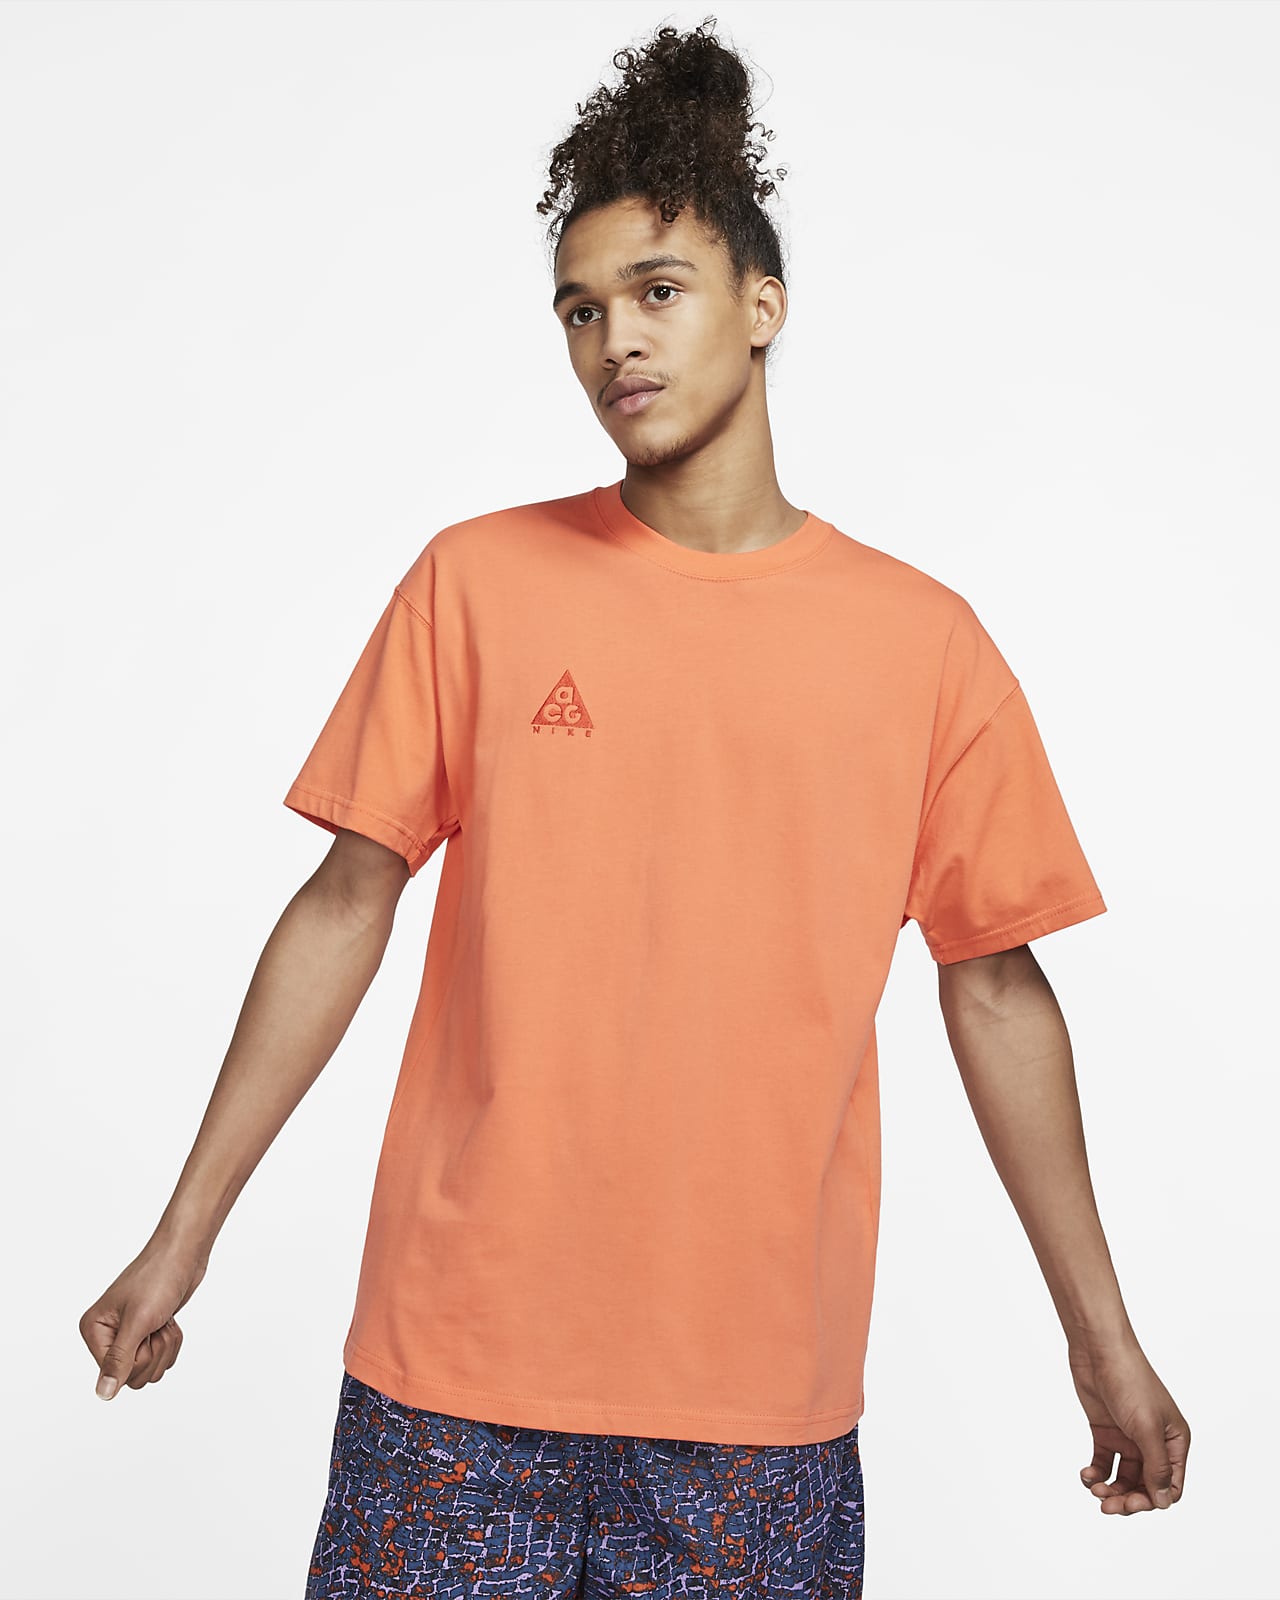 nike all conditions gear t shirt